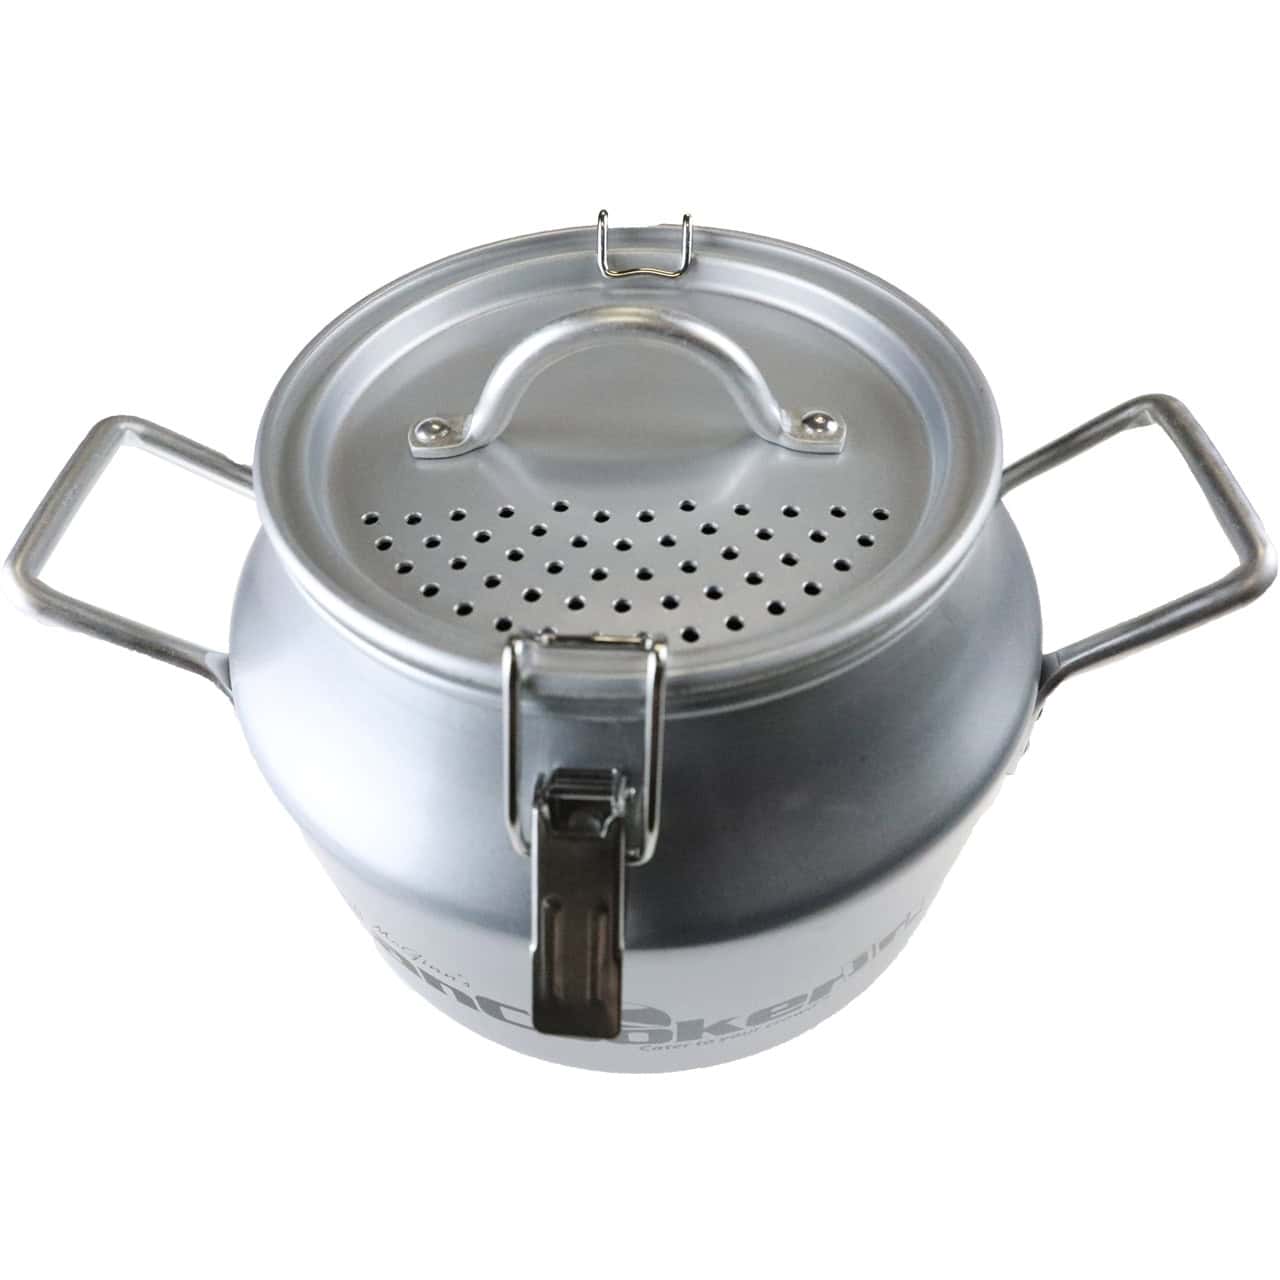 https://www.cancooker.com/wp-content/uploads/2020/07/products-Strainer_Lid_on_top_of_can__73363.1594657554.1280.1280.jpg